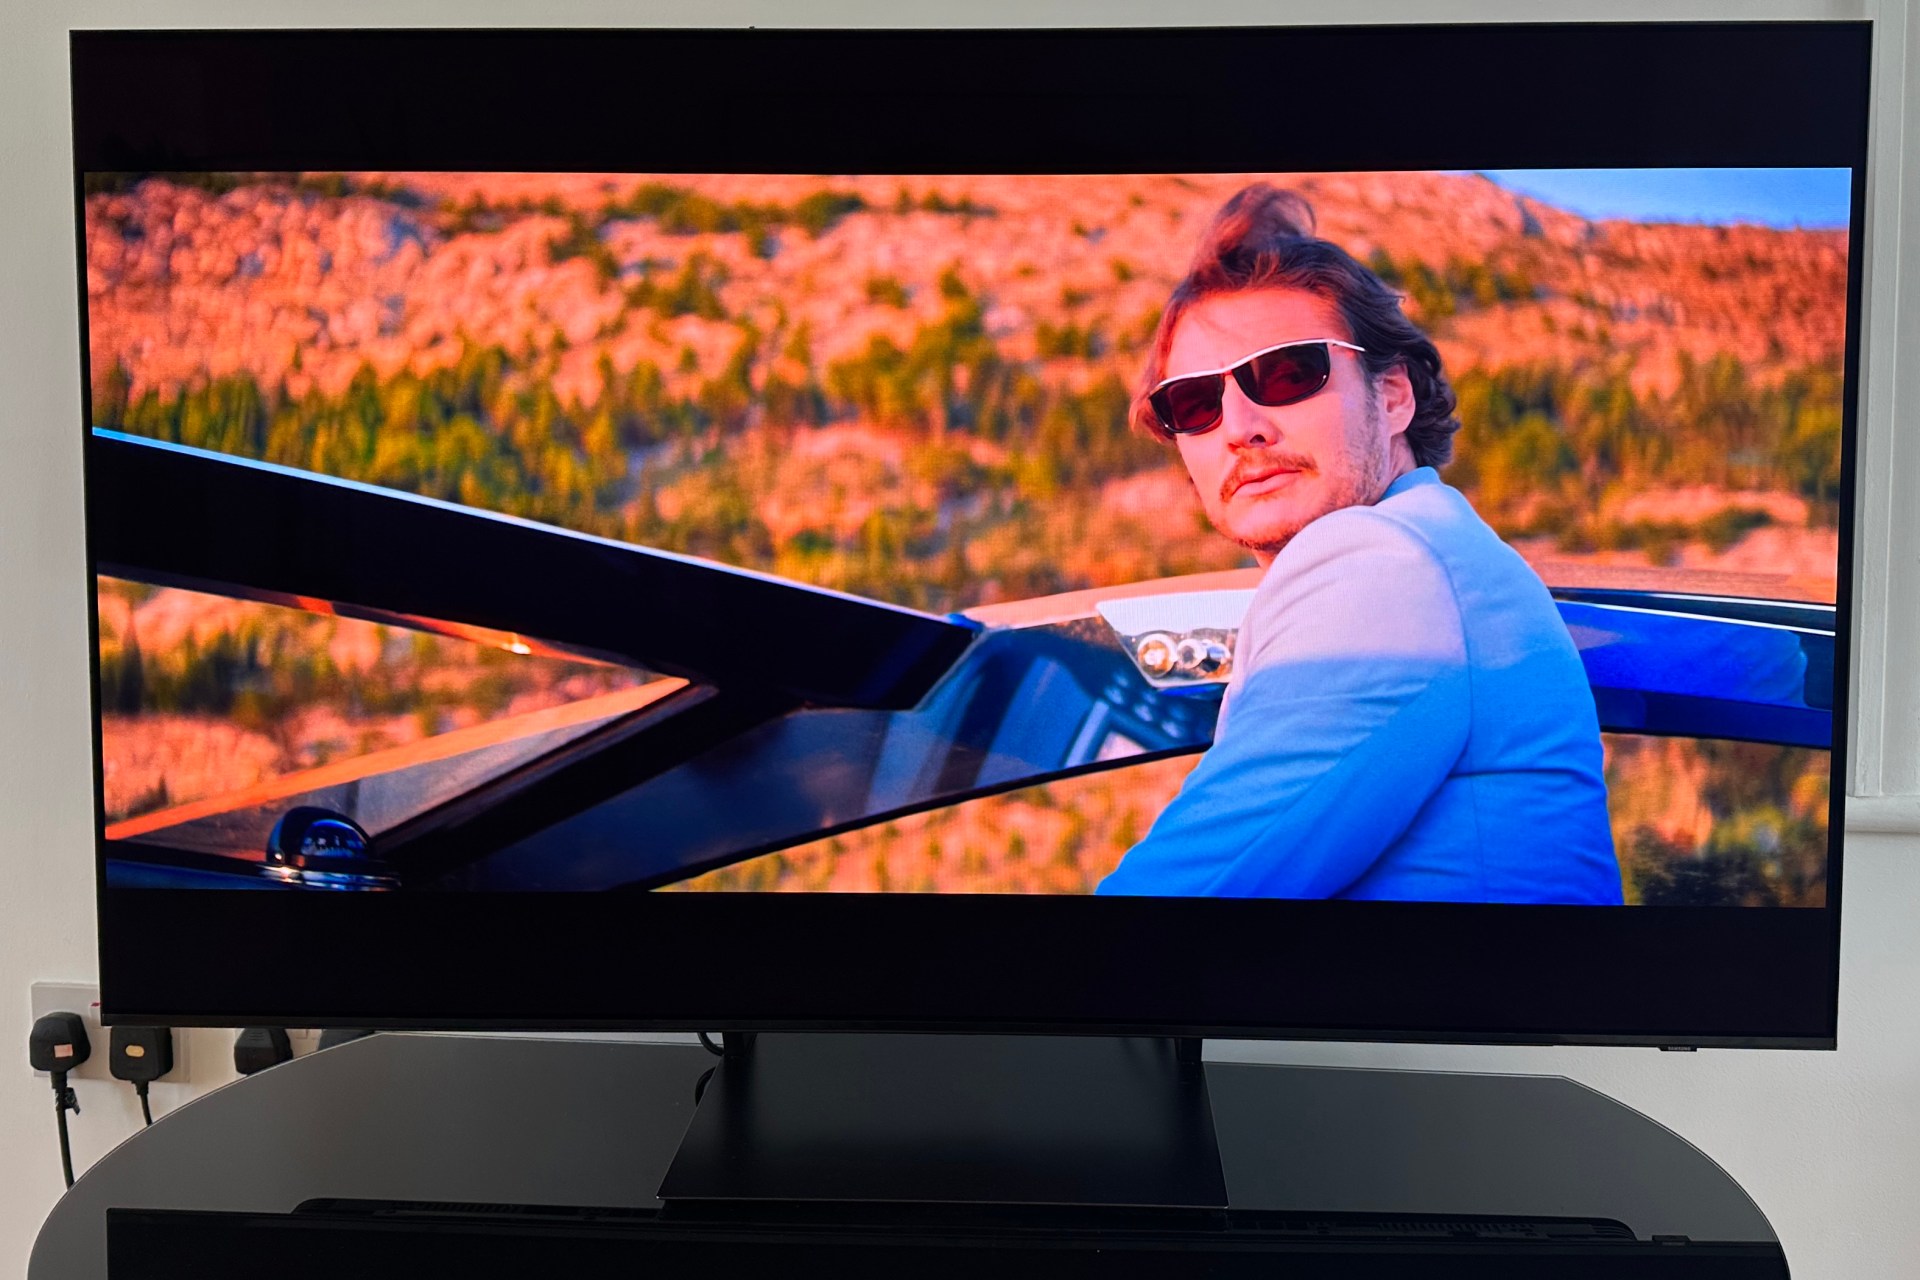 LG OLED55C3: the best 4K TV available right now? - Son-Vidéo.com: blog